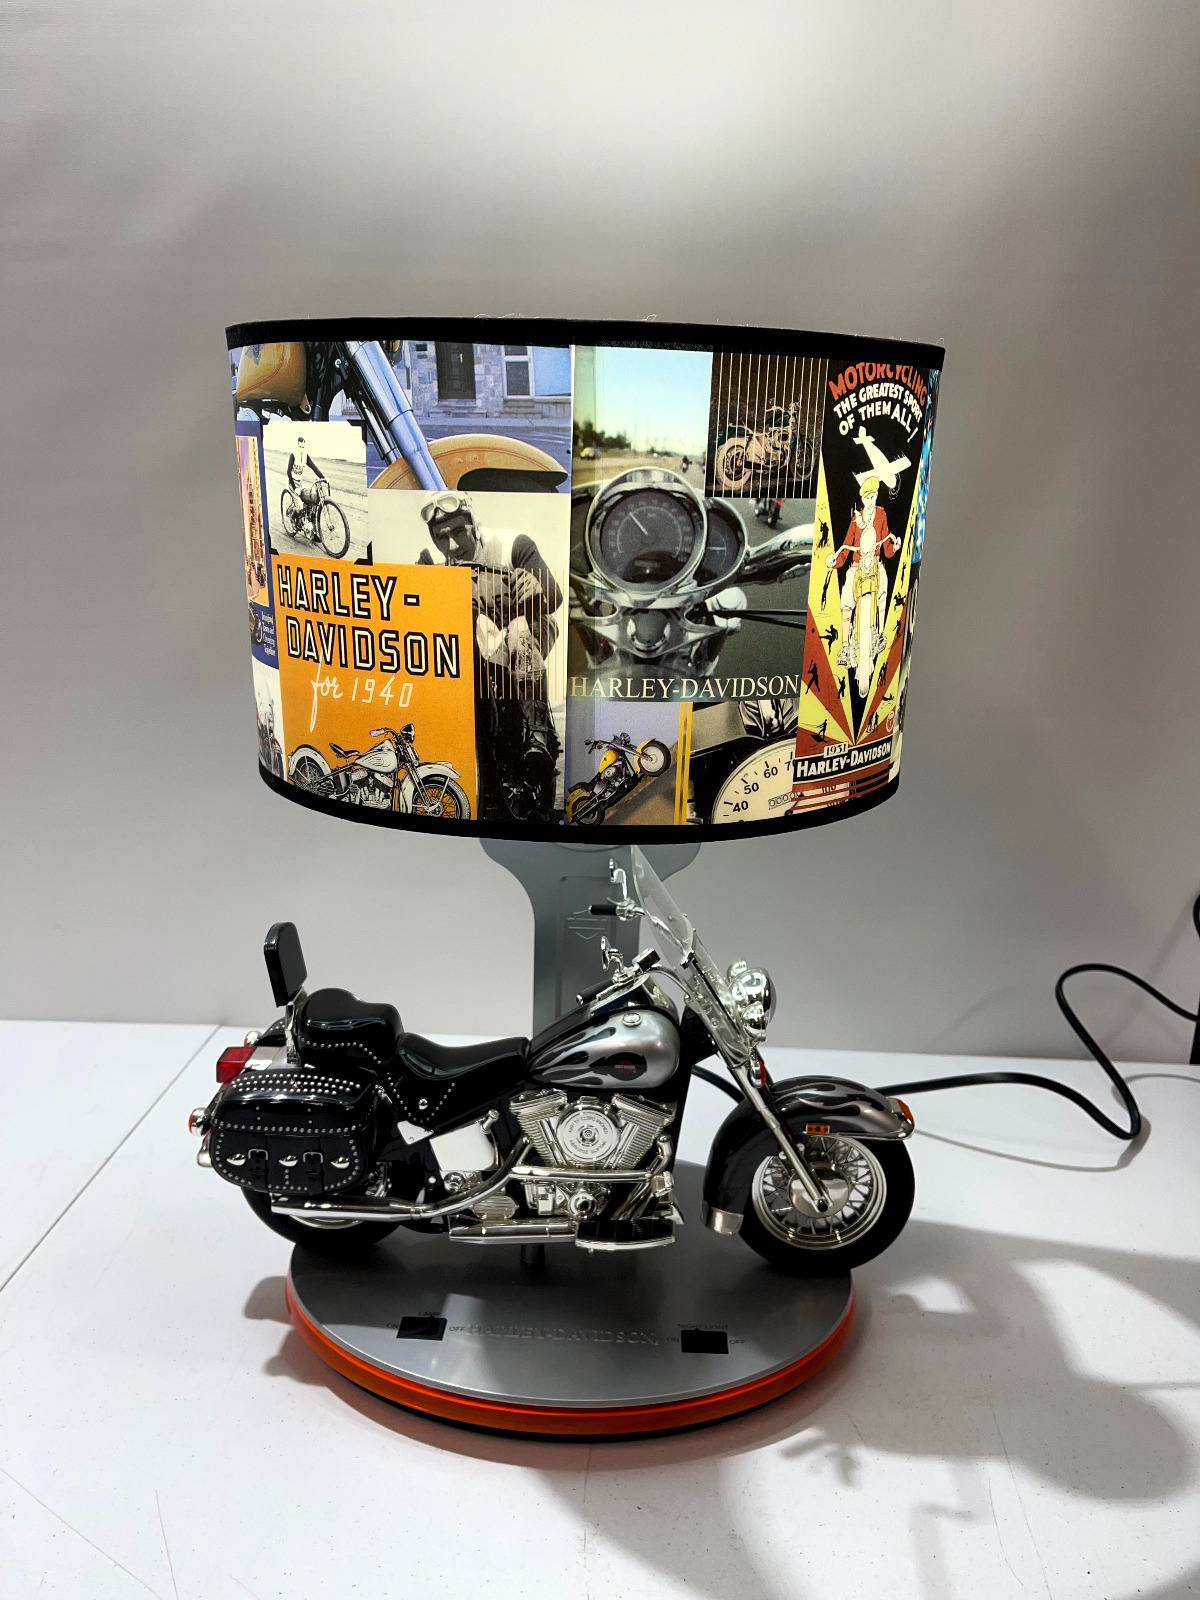 2004 Harley Davidson Heritage Softail Table Lamp Night Light With Sound Vintage